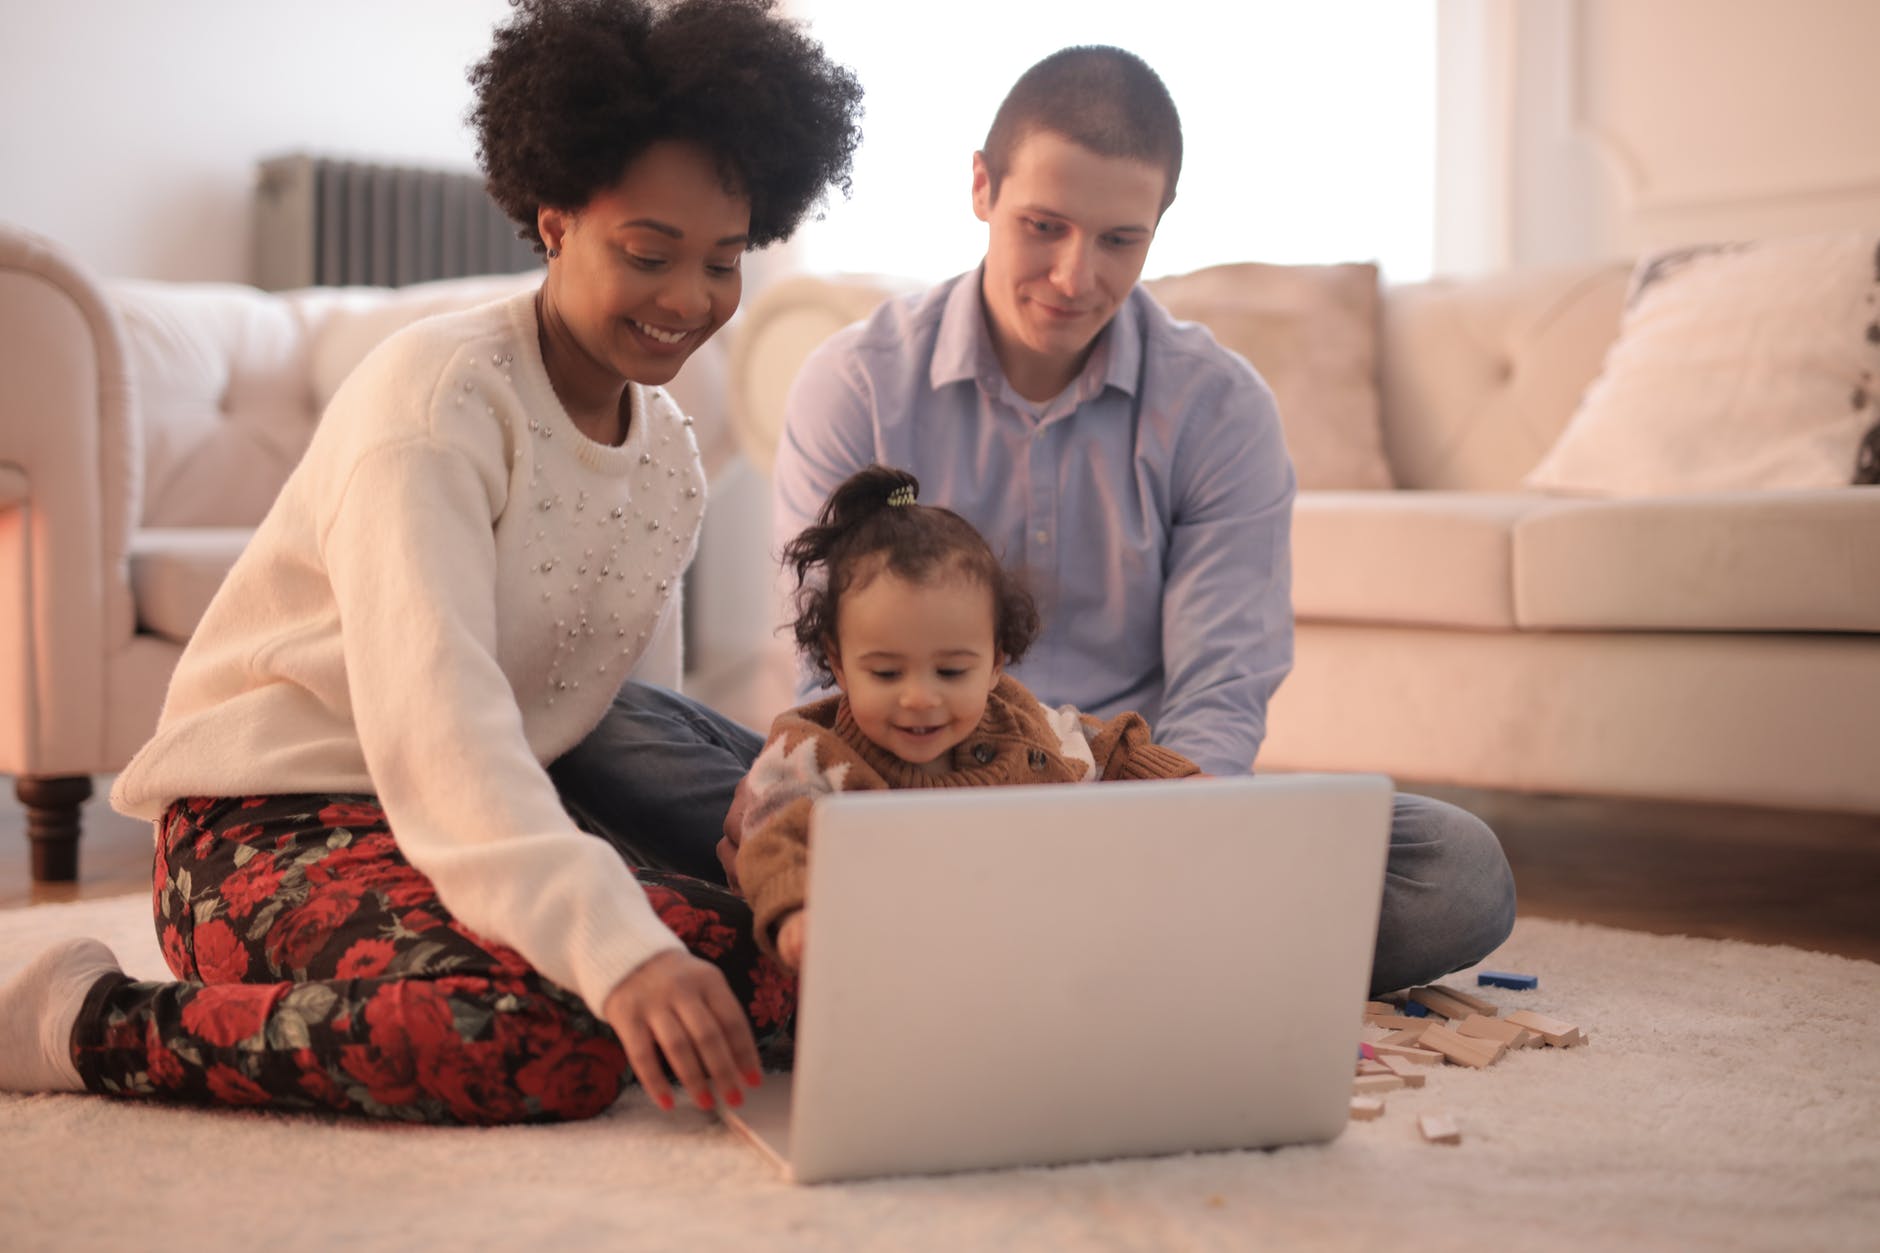 photo of family sitting on floor while using laptop